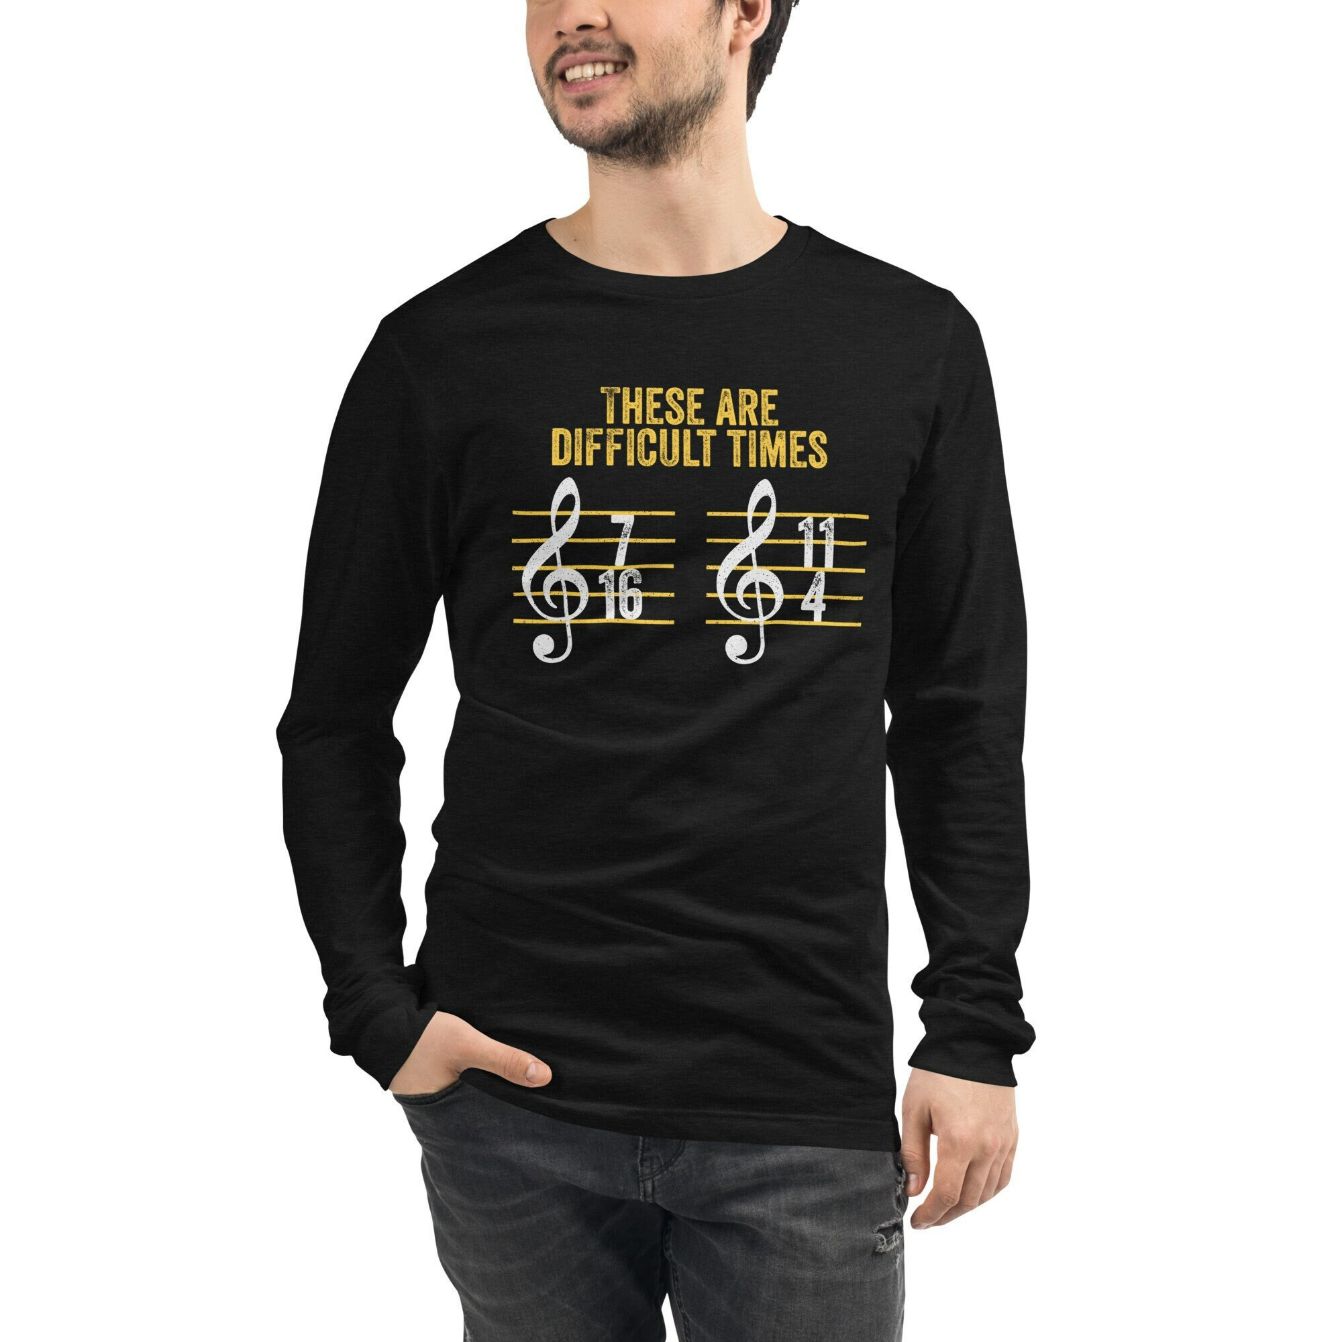 Funny Musician These Are Difficult Times Rhythm Music Theory Joke Orchestra Band Composer Performing Artist Long Sleeve Tee